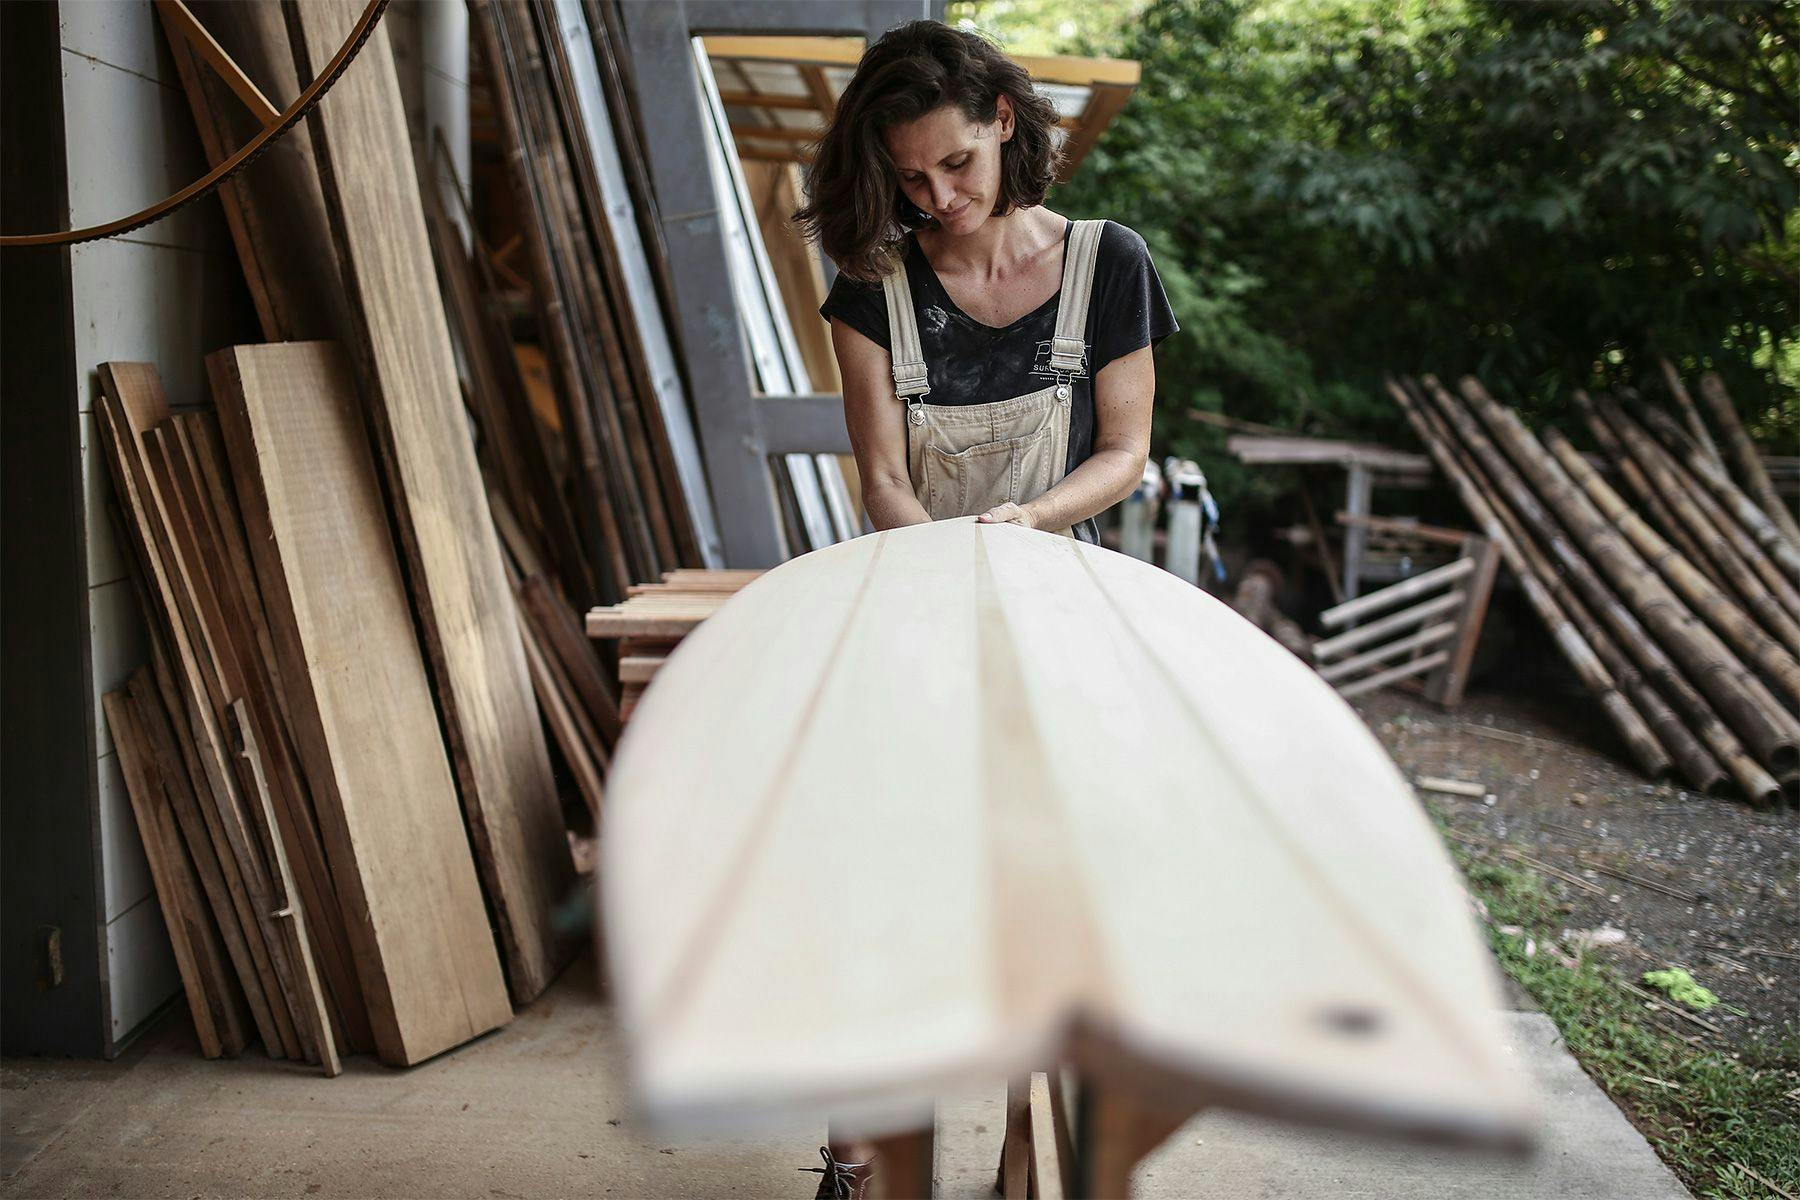 wooden surfboard maker marceline craig of pina surfboards in costa rica shaping a wooden fish